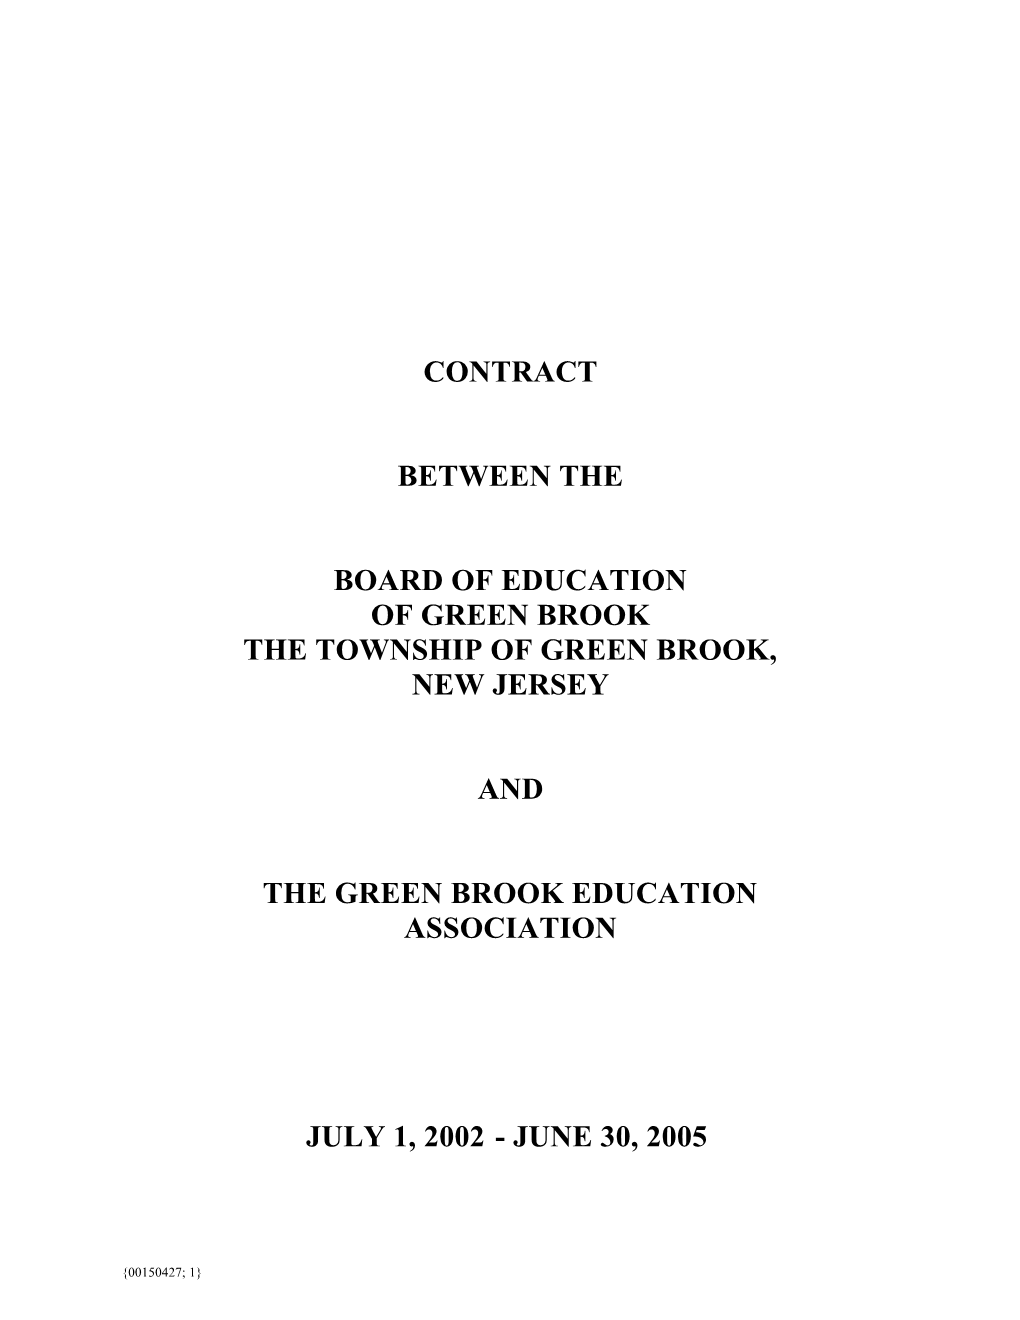 Contract for Greenbrook (00150427;1)